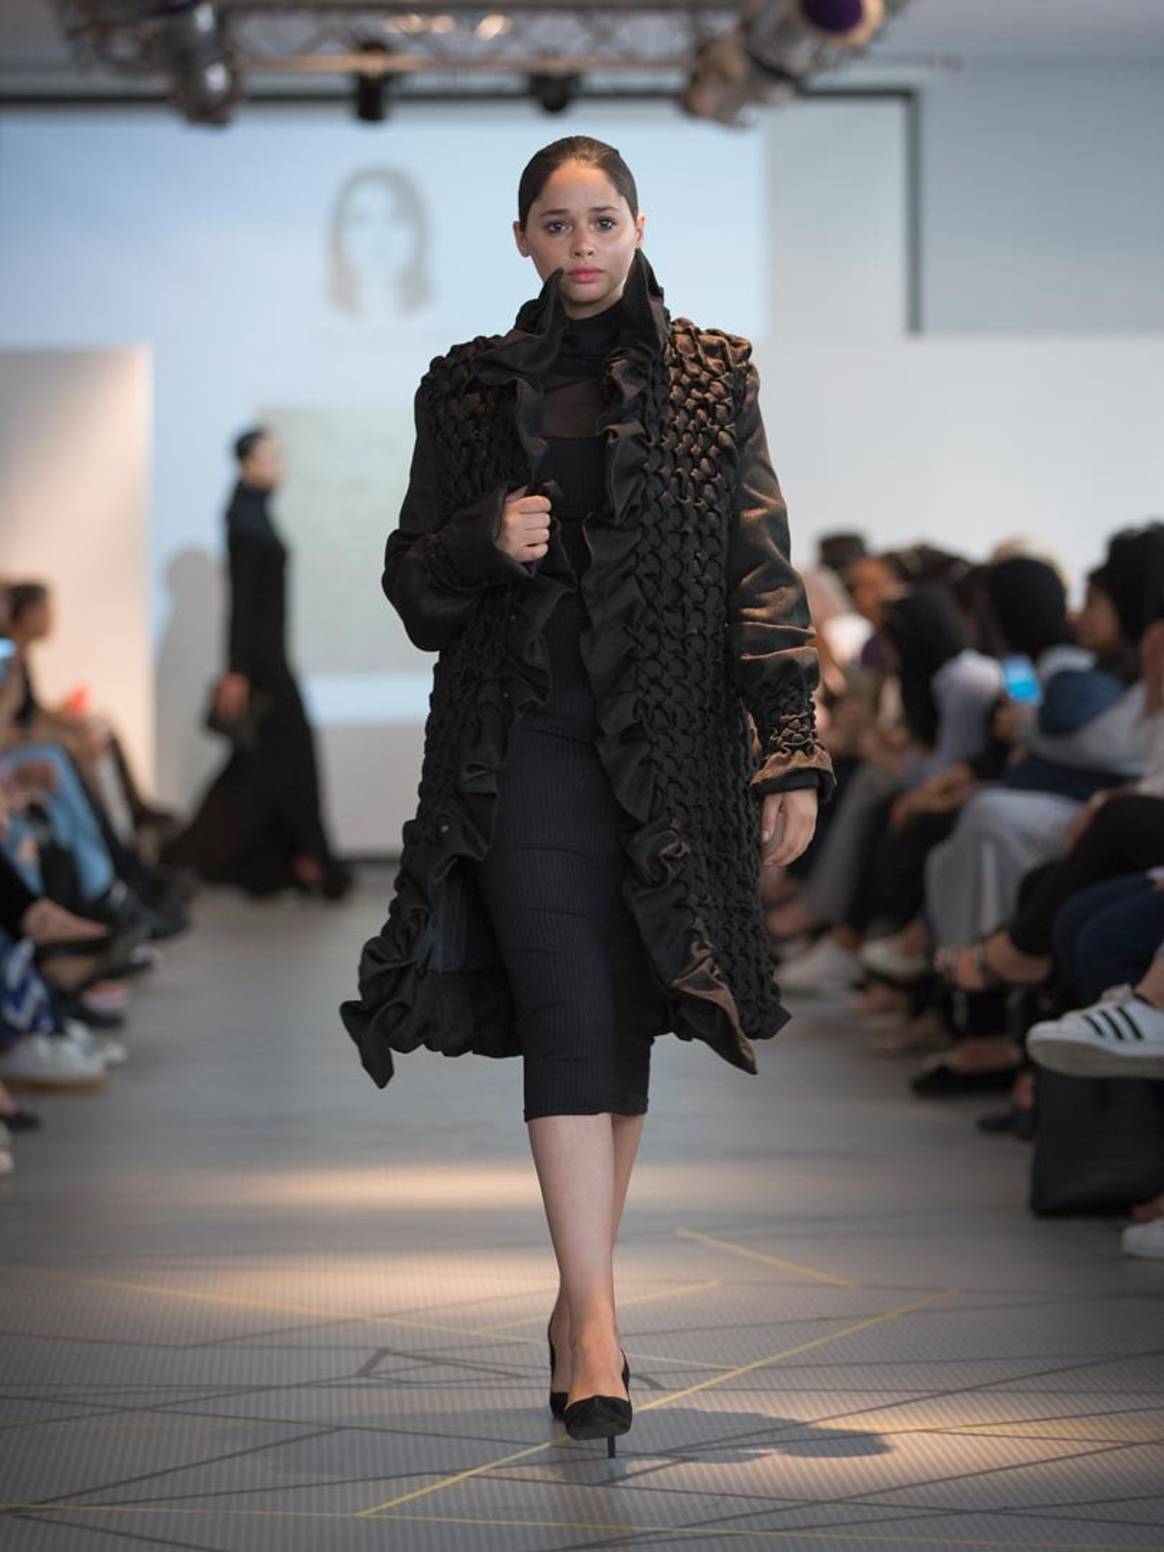 In Pictures: New Generation’s Fashion Show in Casablanca